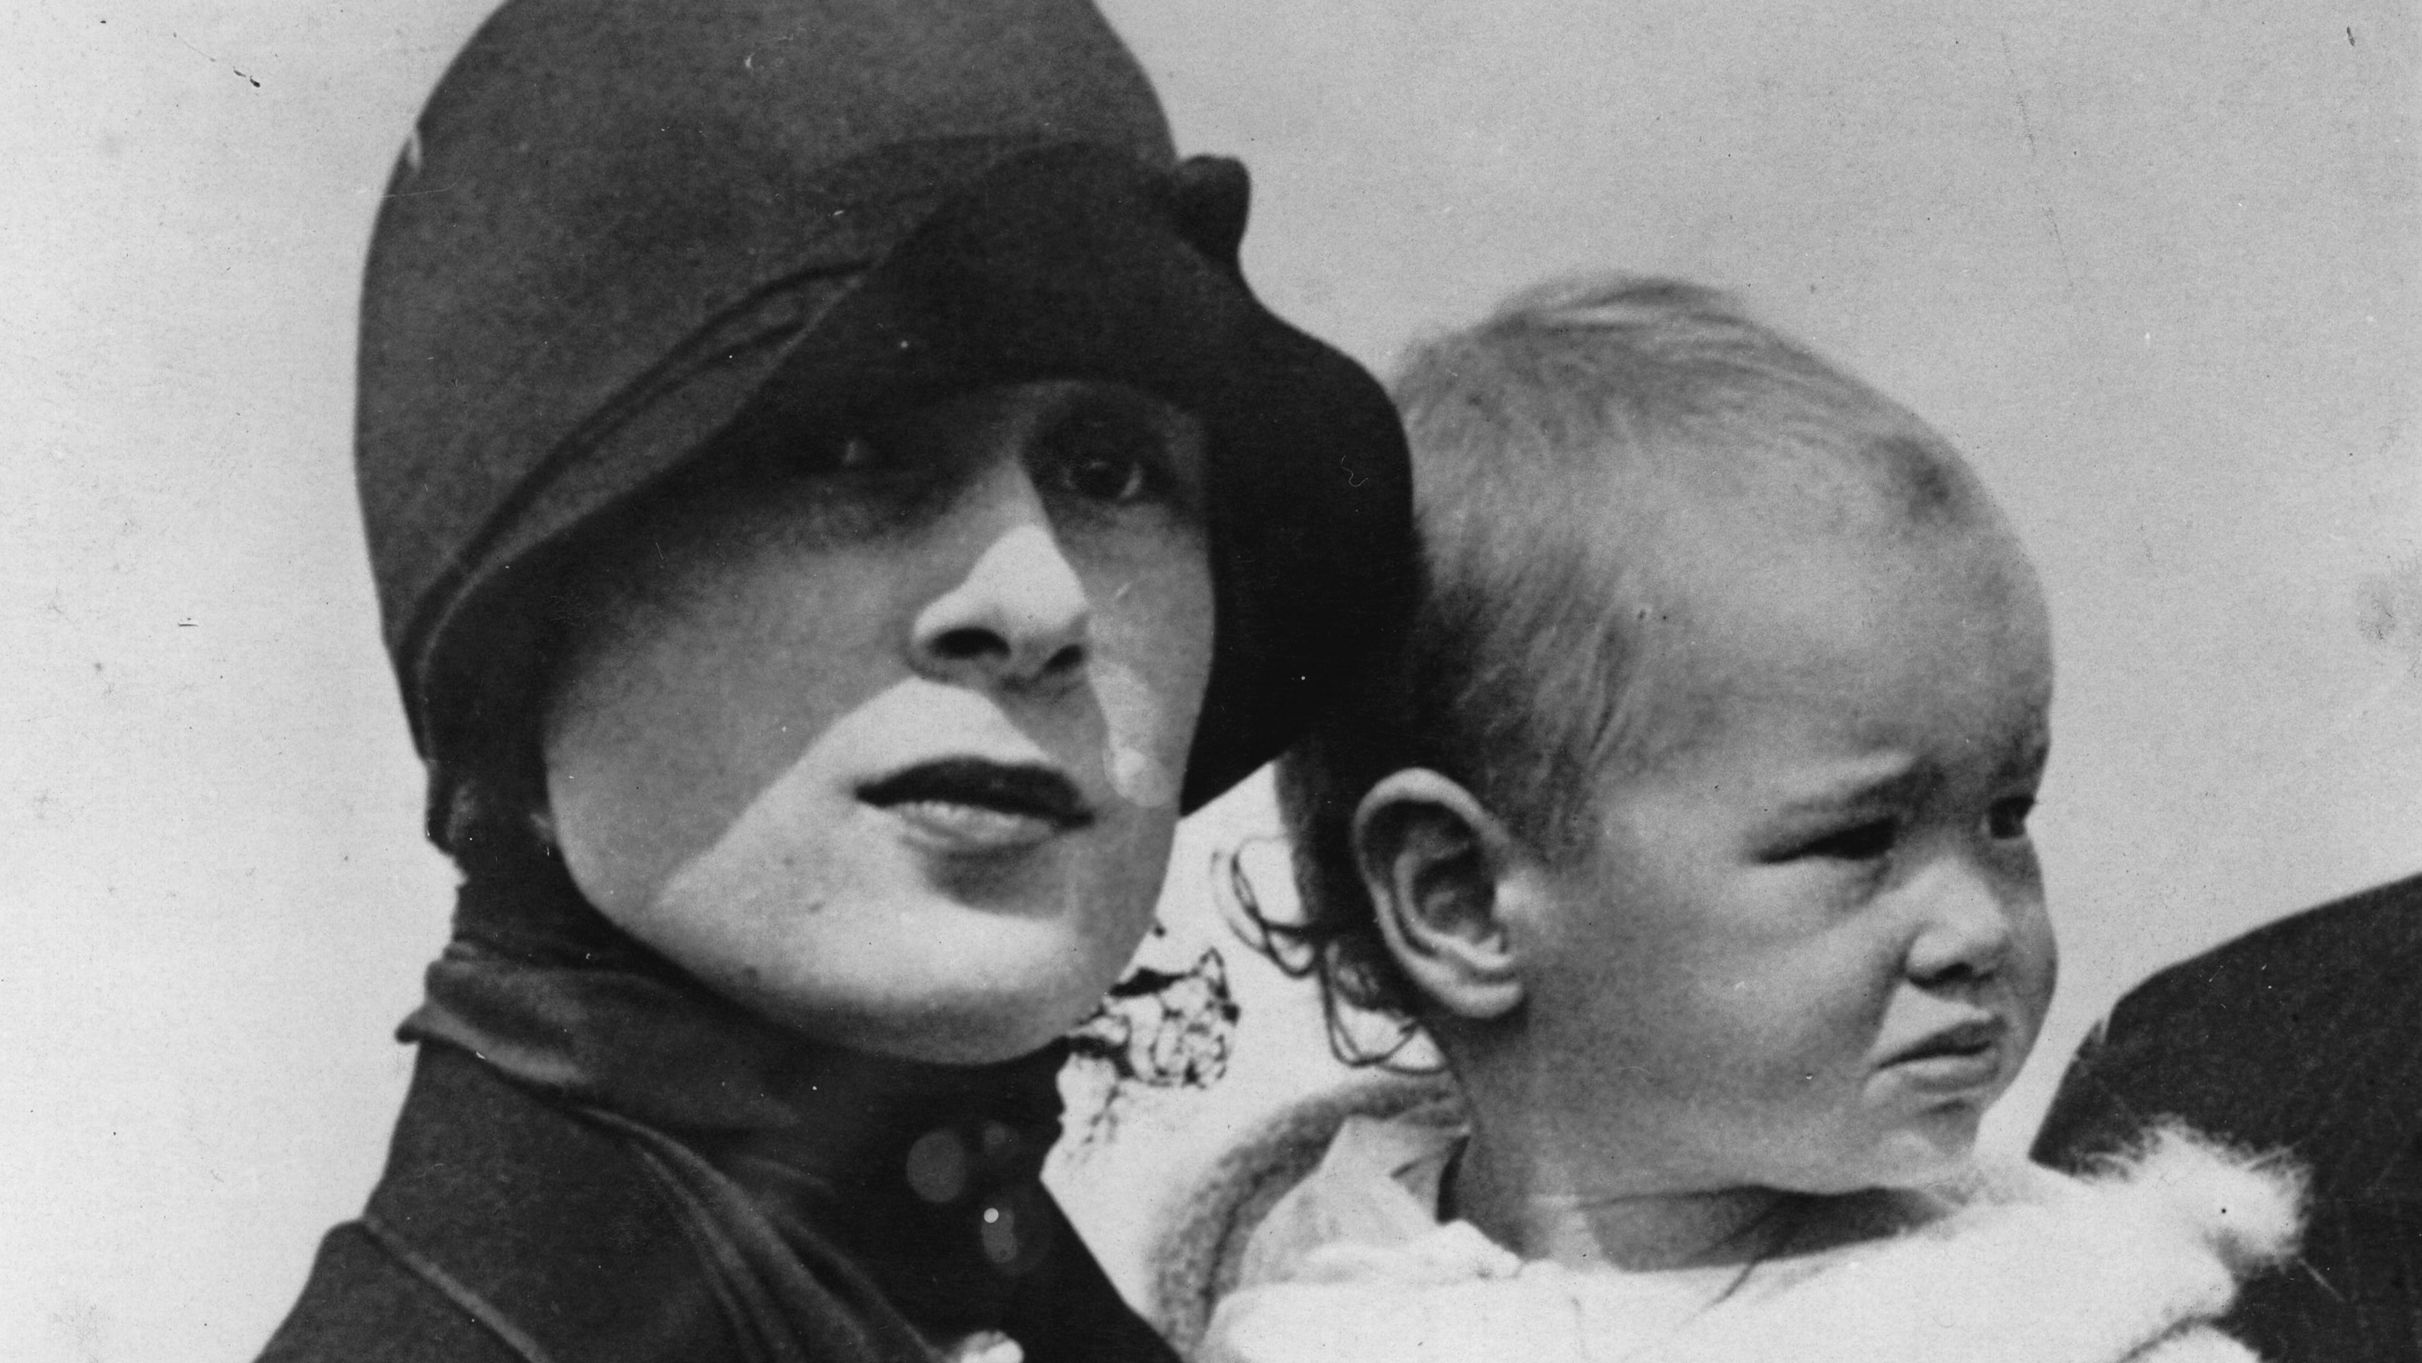 A young Vanderbilt is seen with her mother, also named Gloria, in 1926. Vanderbilt was born in New York in 1924, but she grew up in France. Her father, financier Reginald Vanderbilt, was the heir to a railroad fortune and died when she was a baby.